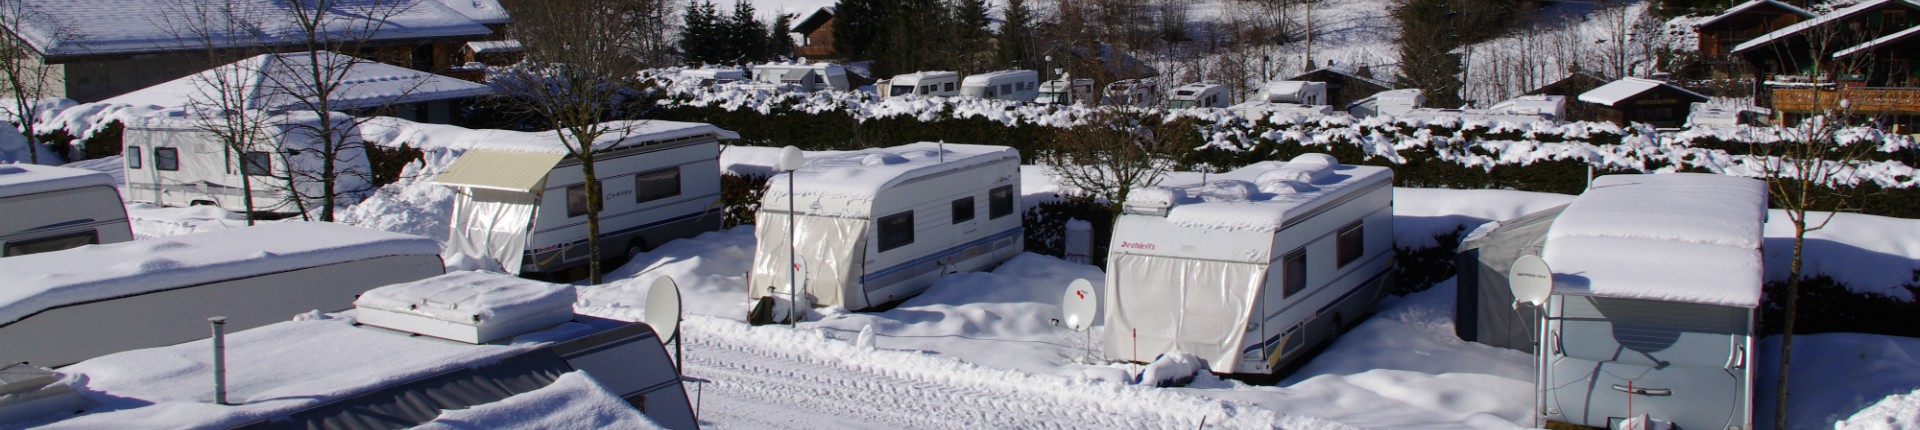 camping-l-oustalet-chatel-hiver-2-137